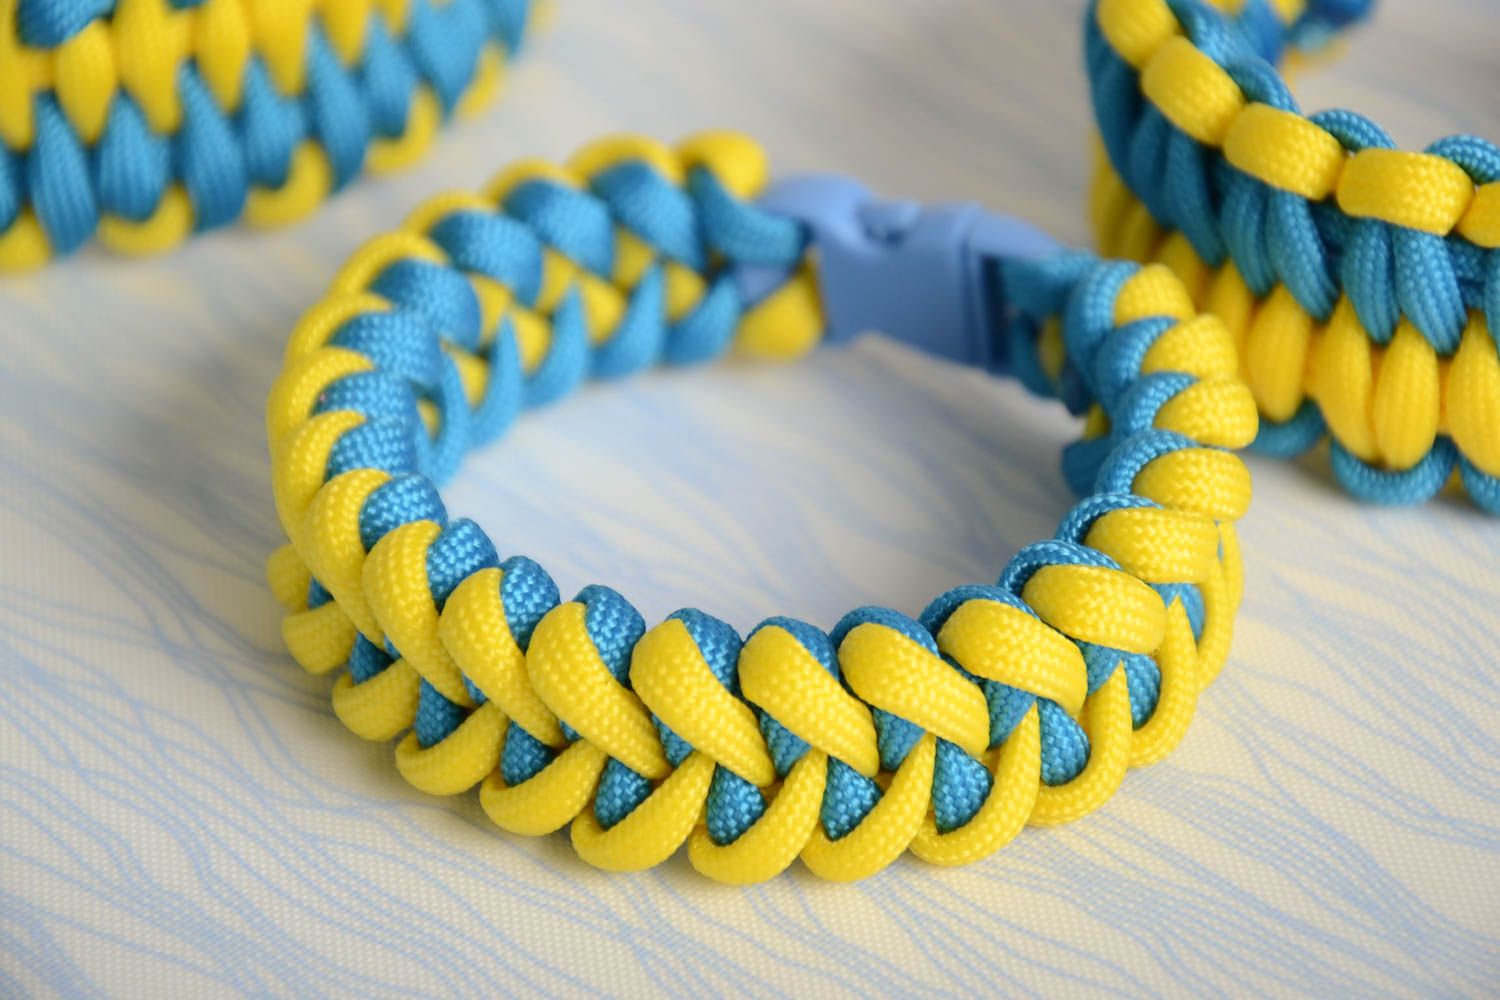 Handmade wrist survival bracelet woven of yellow and blue parachute cords photo 1